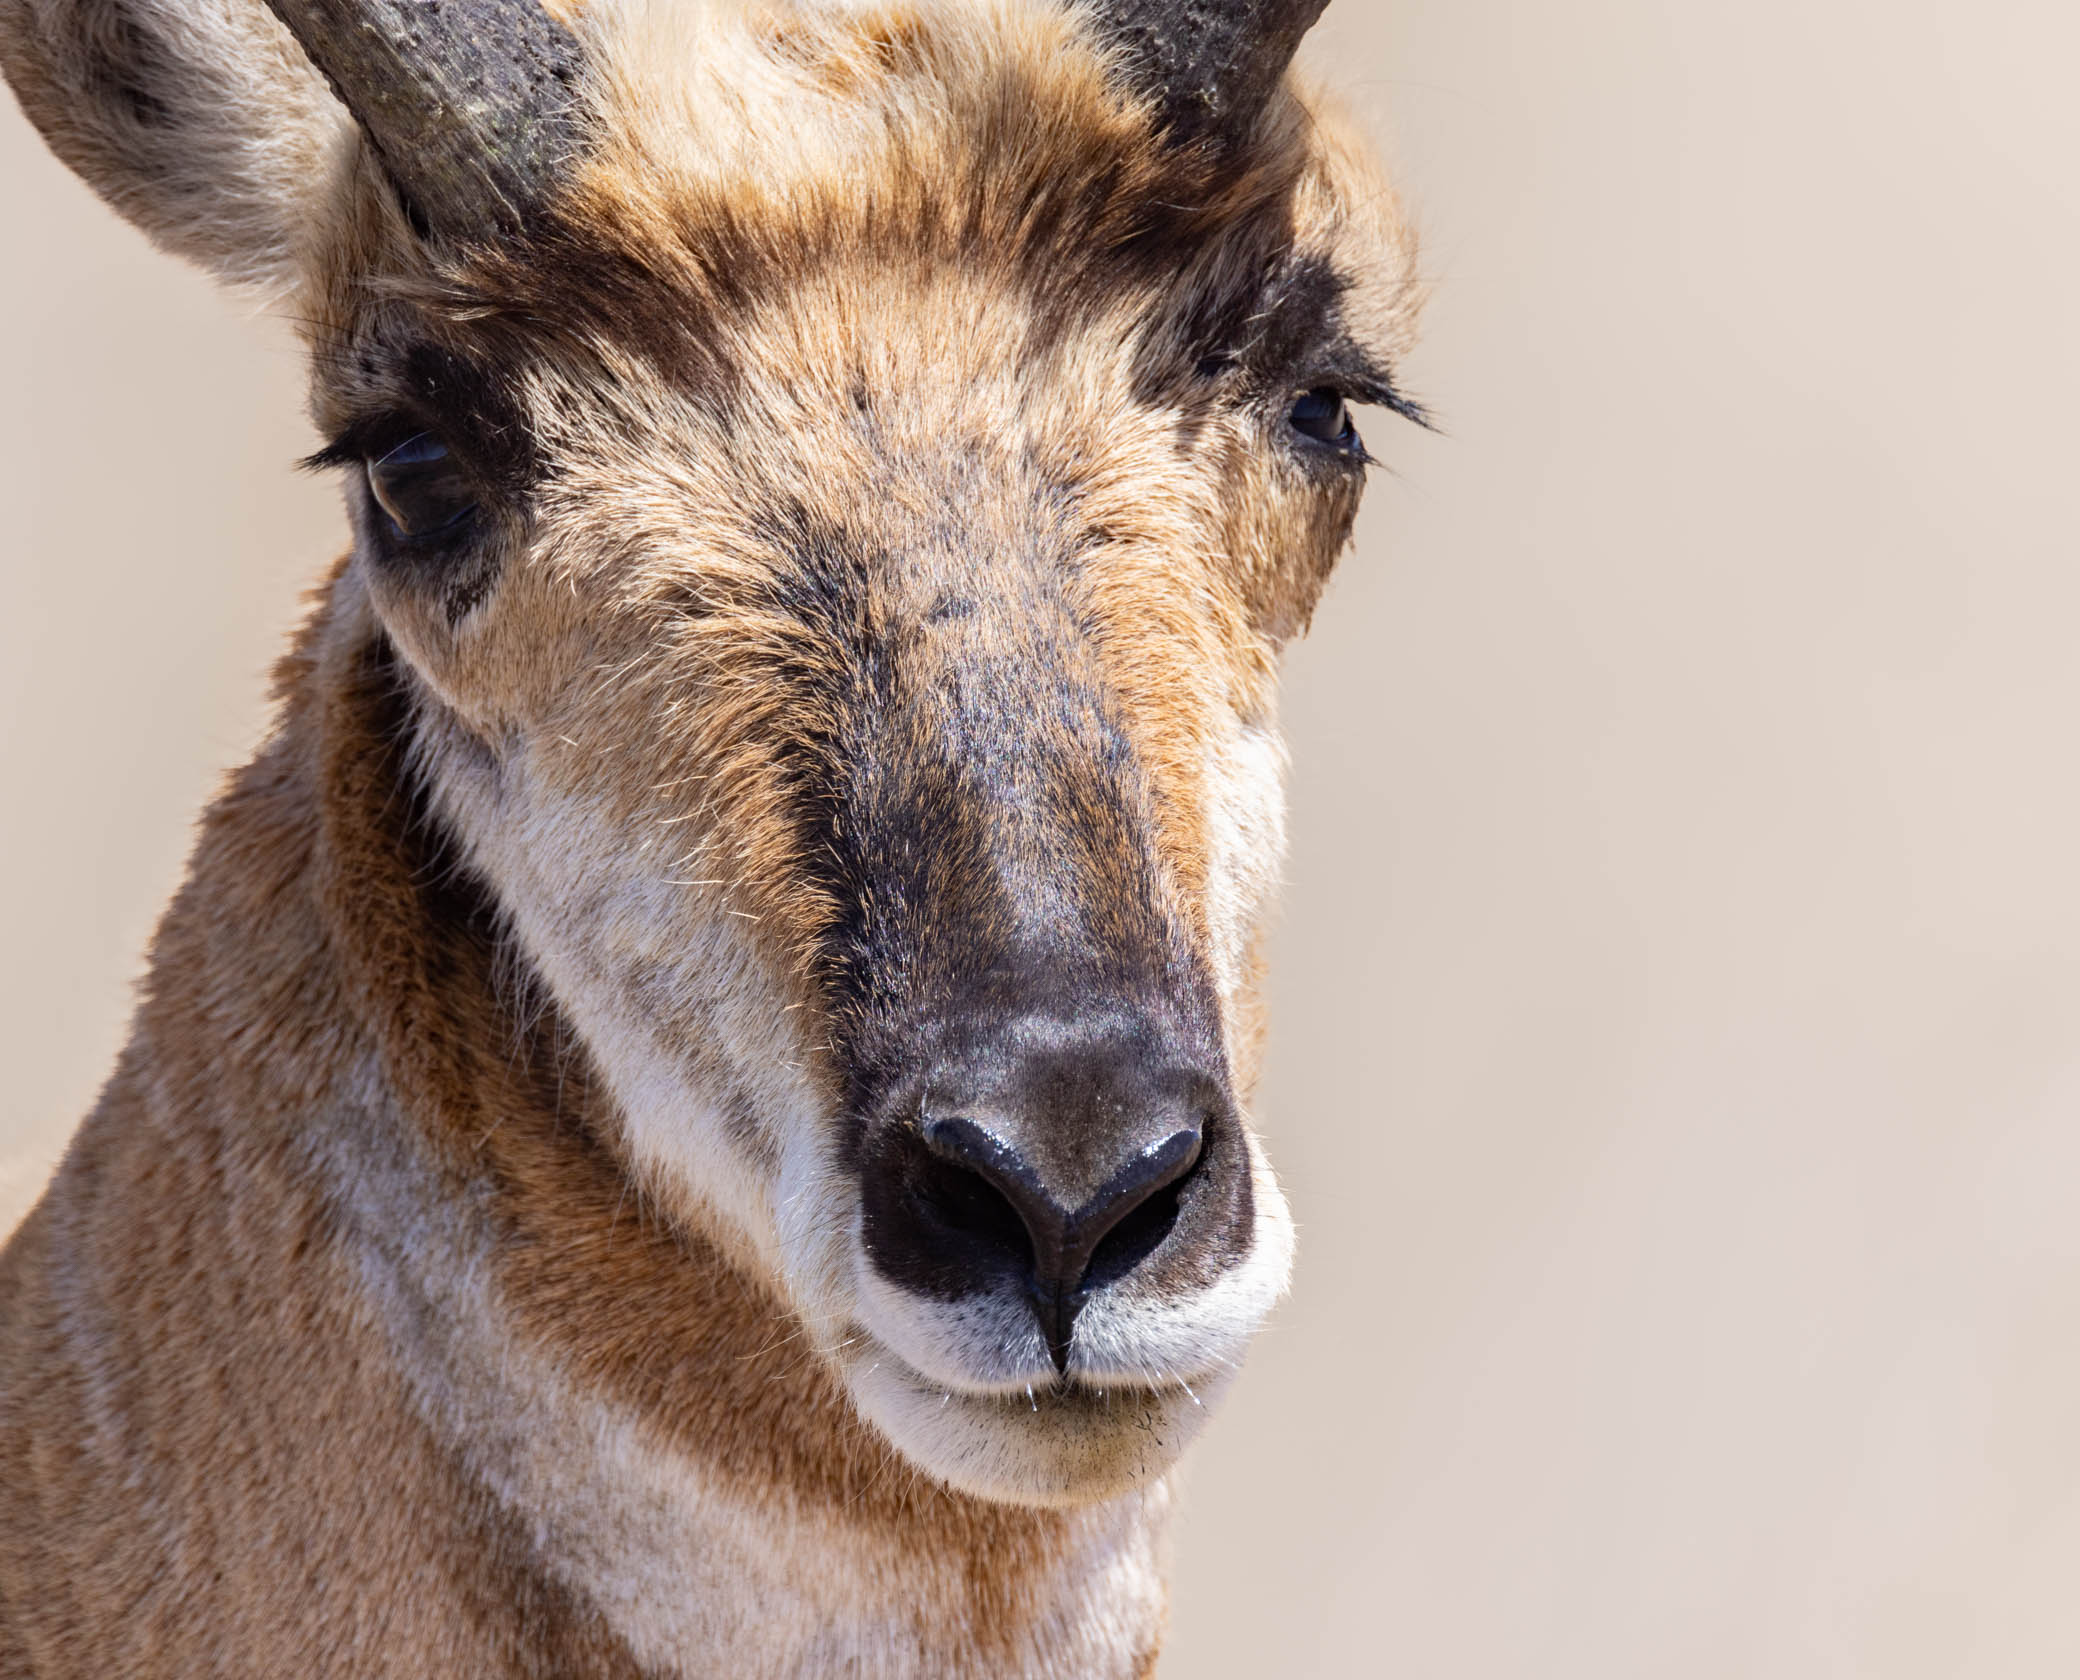 Pronghorn Antelope, a Portrait, Ouray National Wildlife Refuge, Ouray UT, April 29, 2022